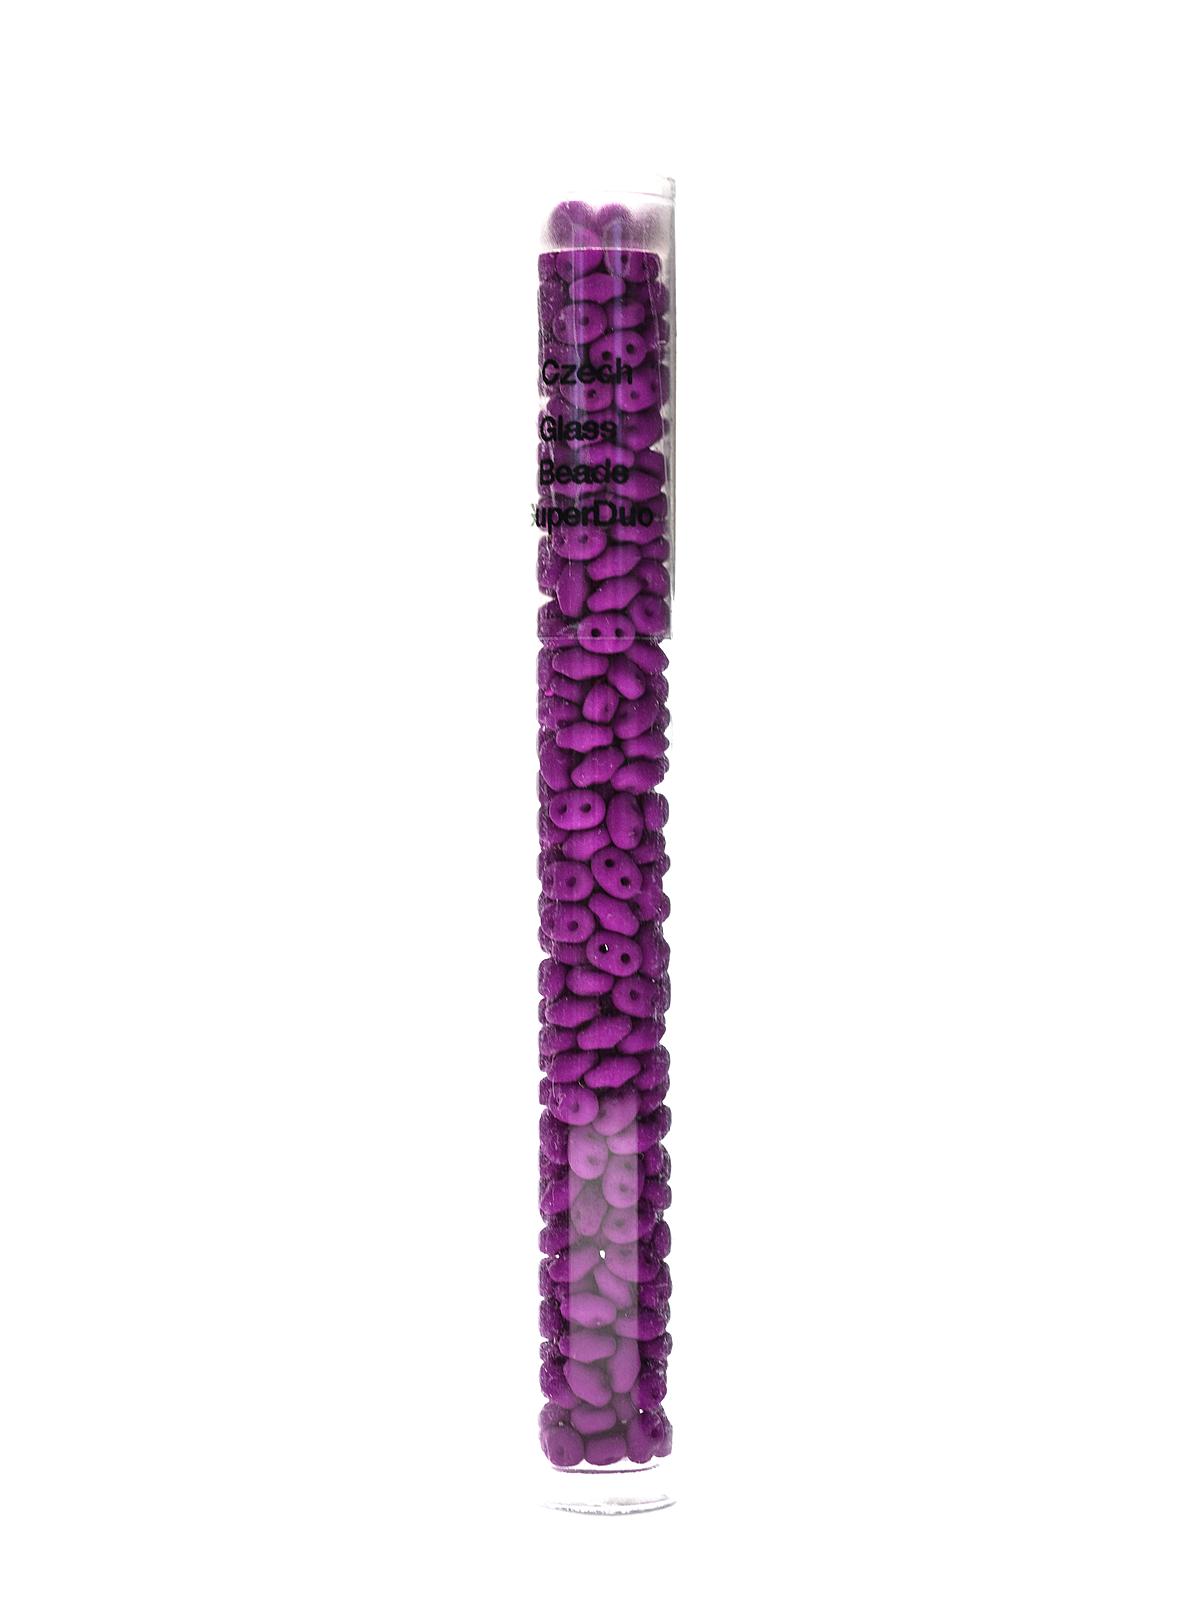 Super Duo Beads Neon Violet 2.5 Mm X 5 Mm 24 Gm Tube